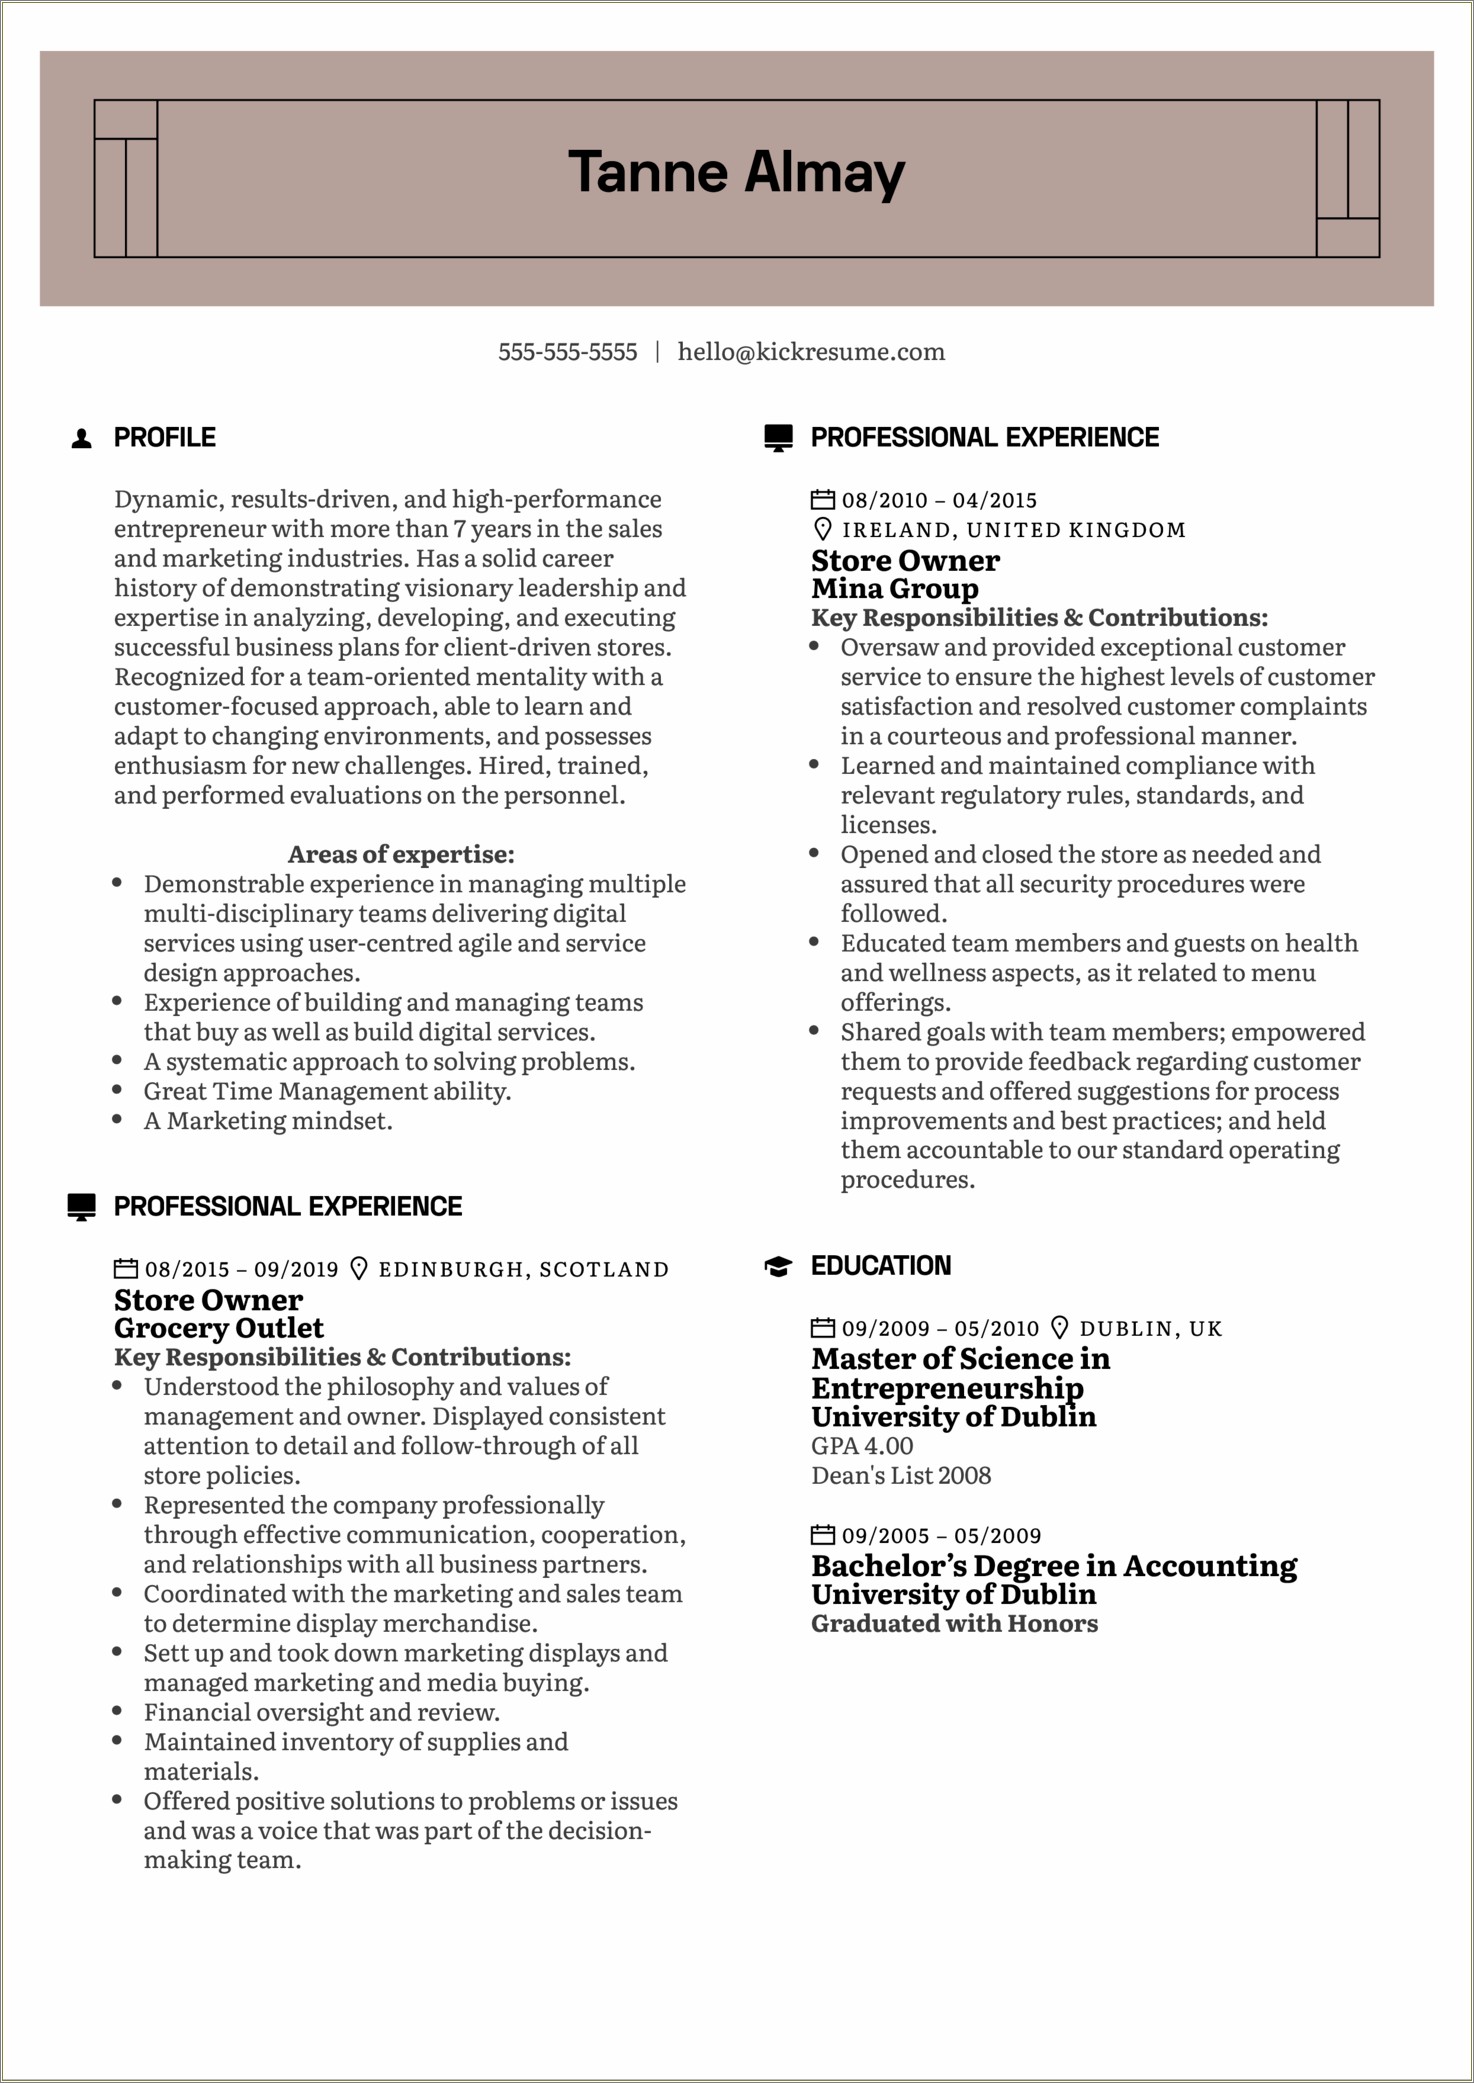 Resume Summary Examples For Business Administration